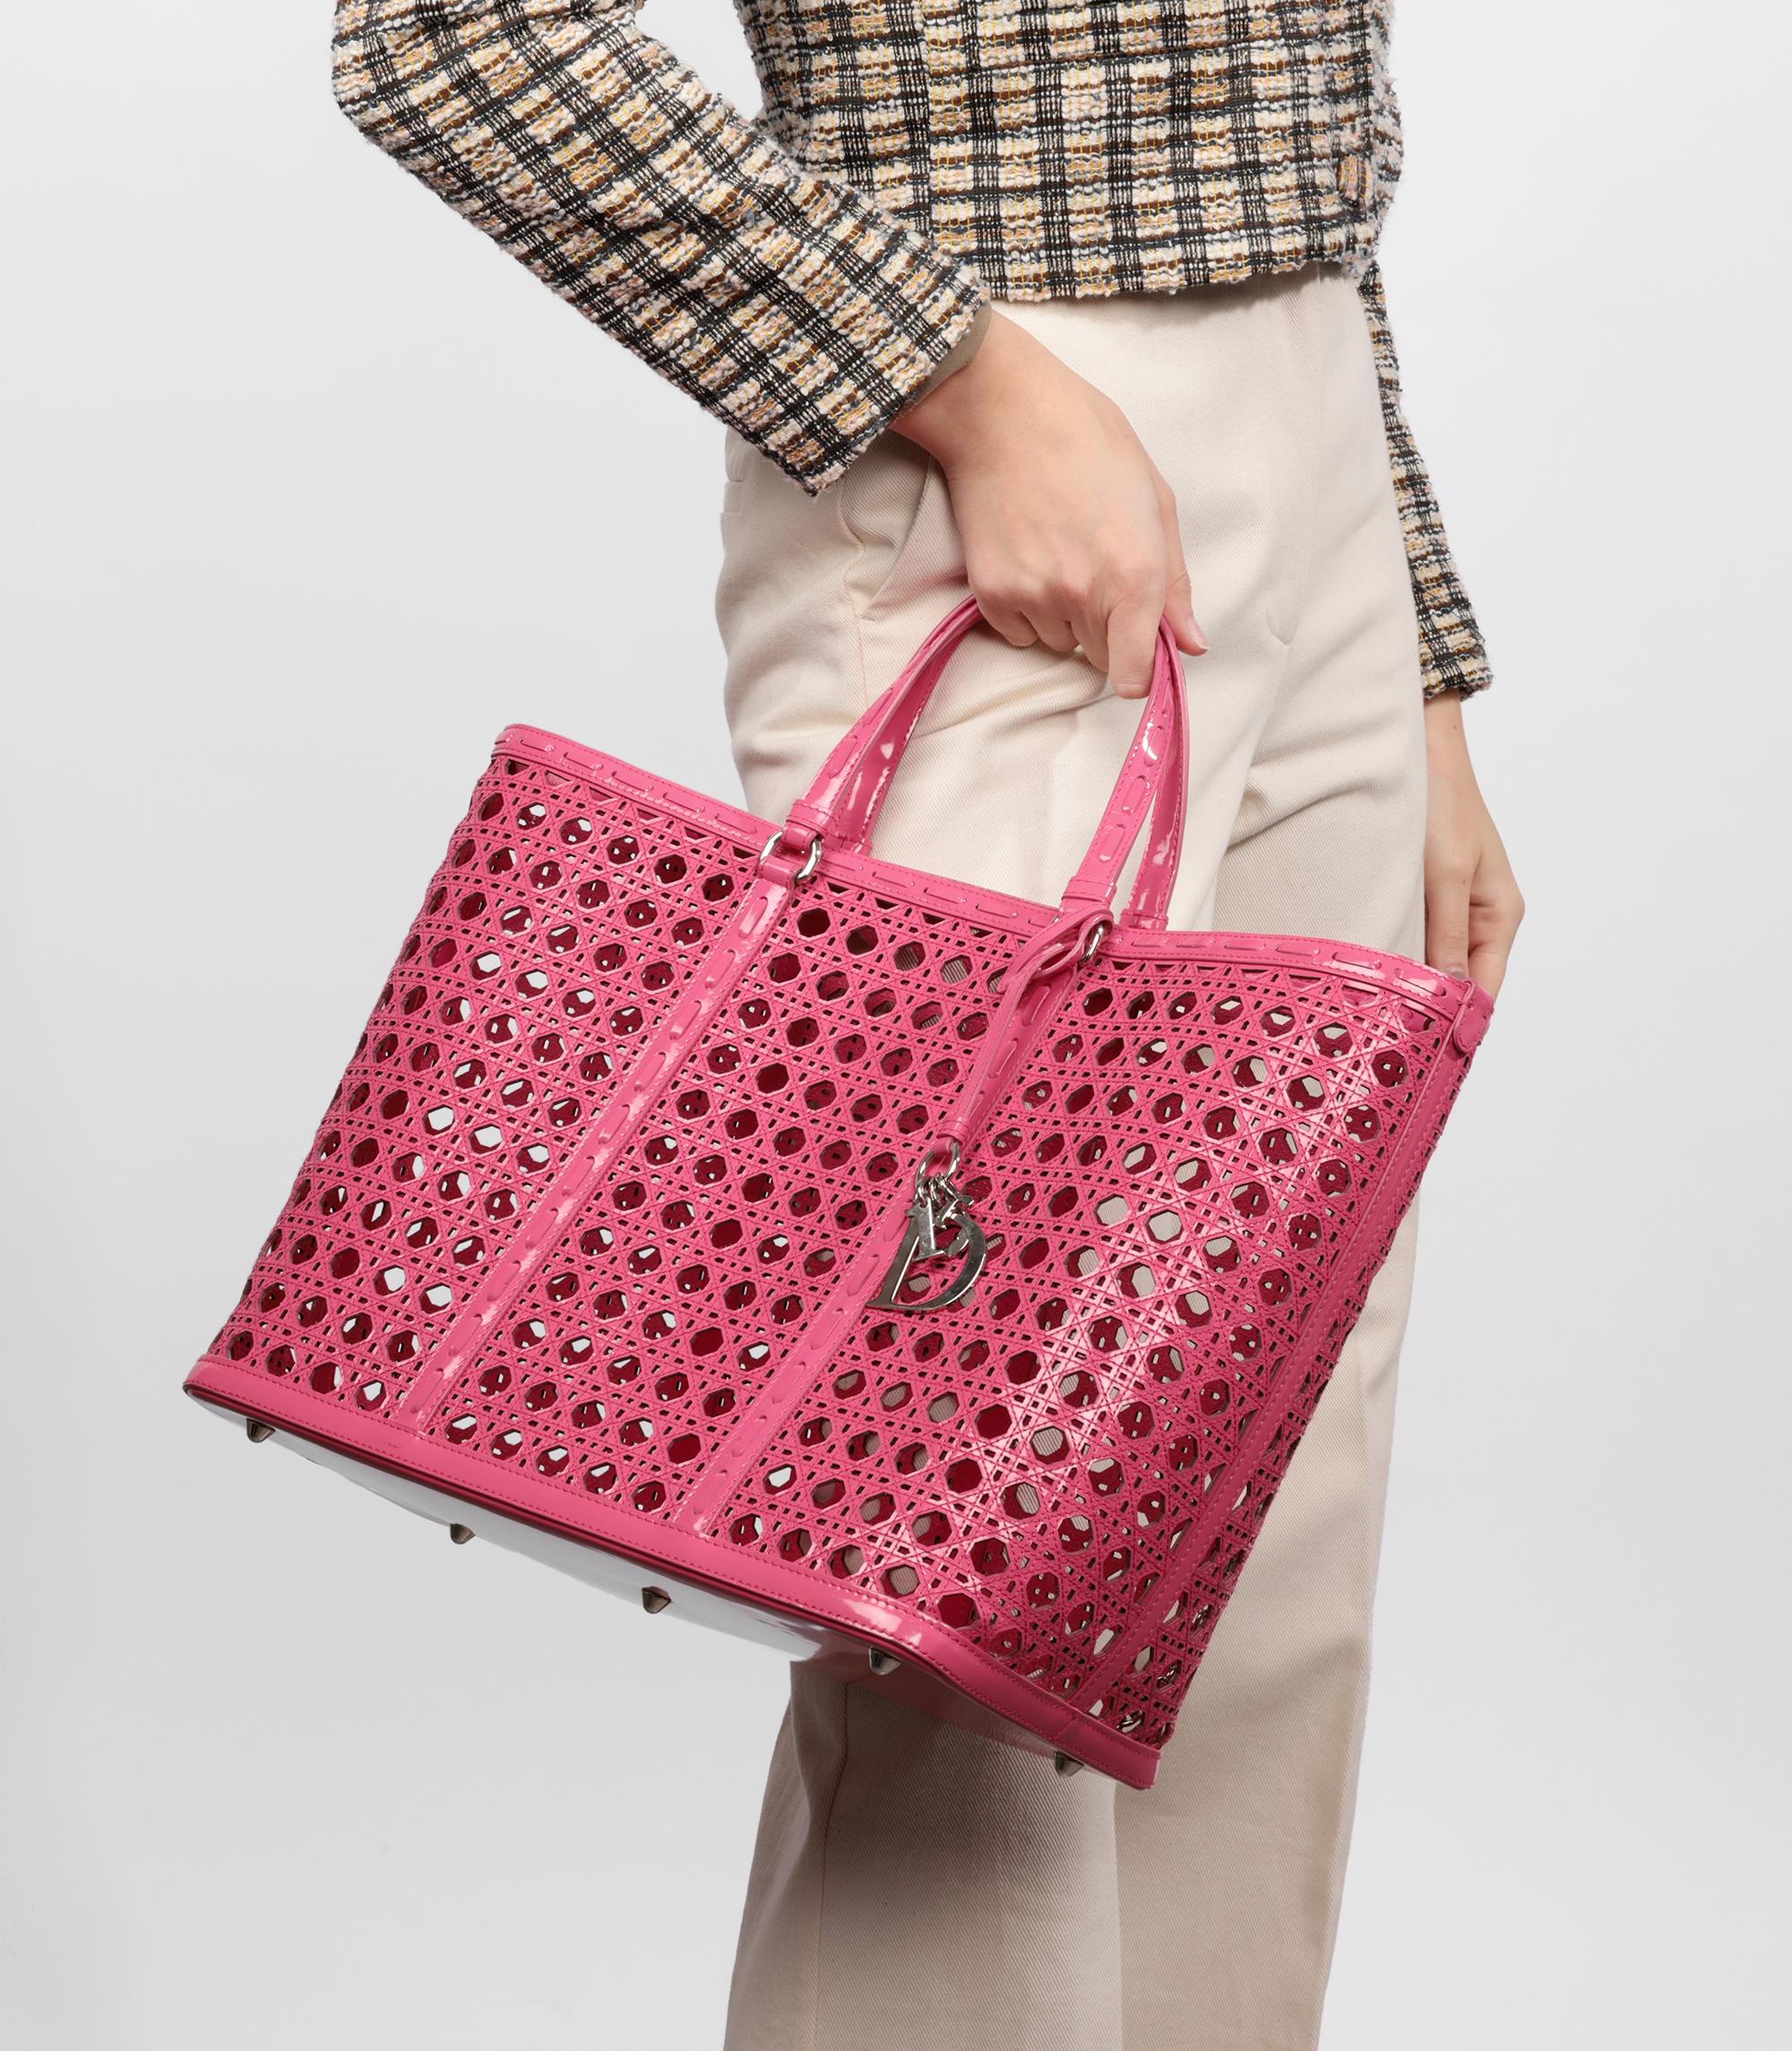 Christian Dior Pink Perforated Patent Leather Tote Bag

Brand- Christian Dior
Model- Tote Bag
Product Type- Tote
Serial Number- 17********
Age- Circa 2011
Accompanied By- Christian Dior Dust Bag, Clochette, Interior Pouch
Colour- Pink
Hardware-